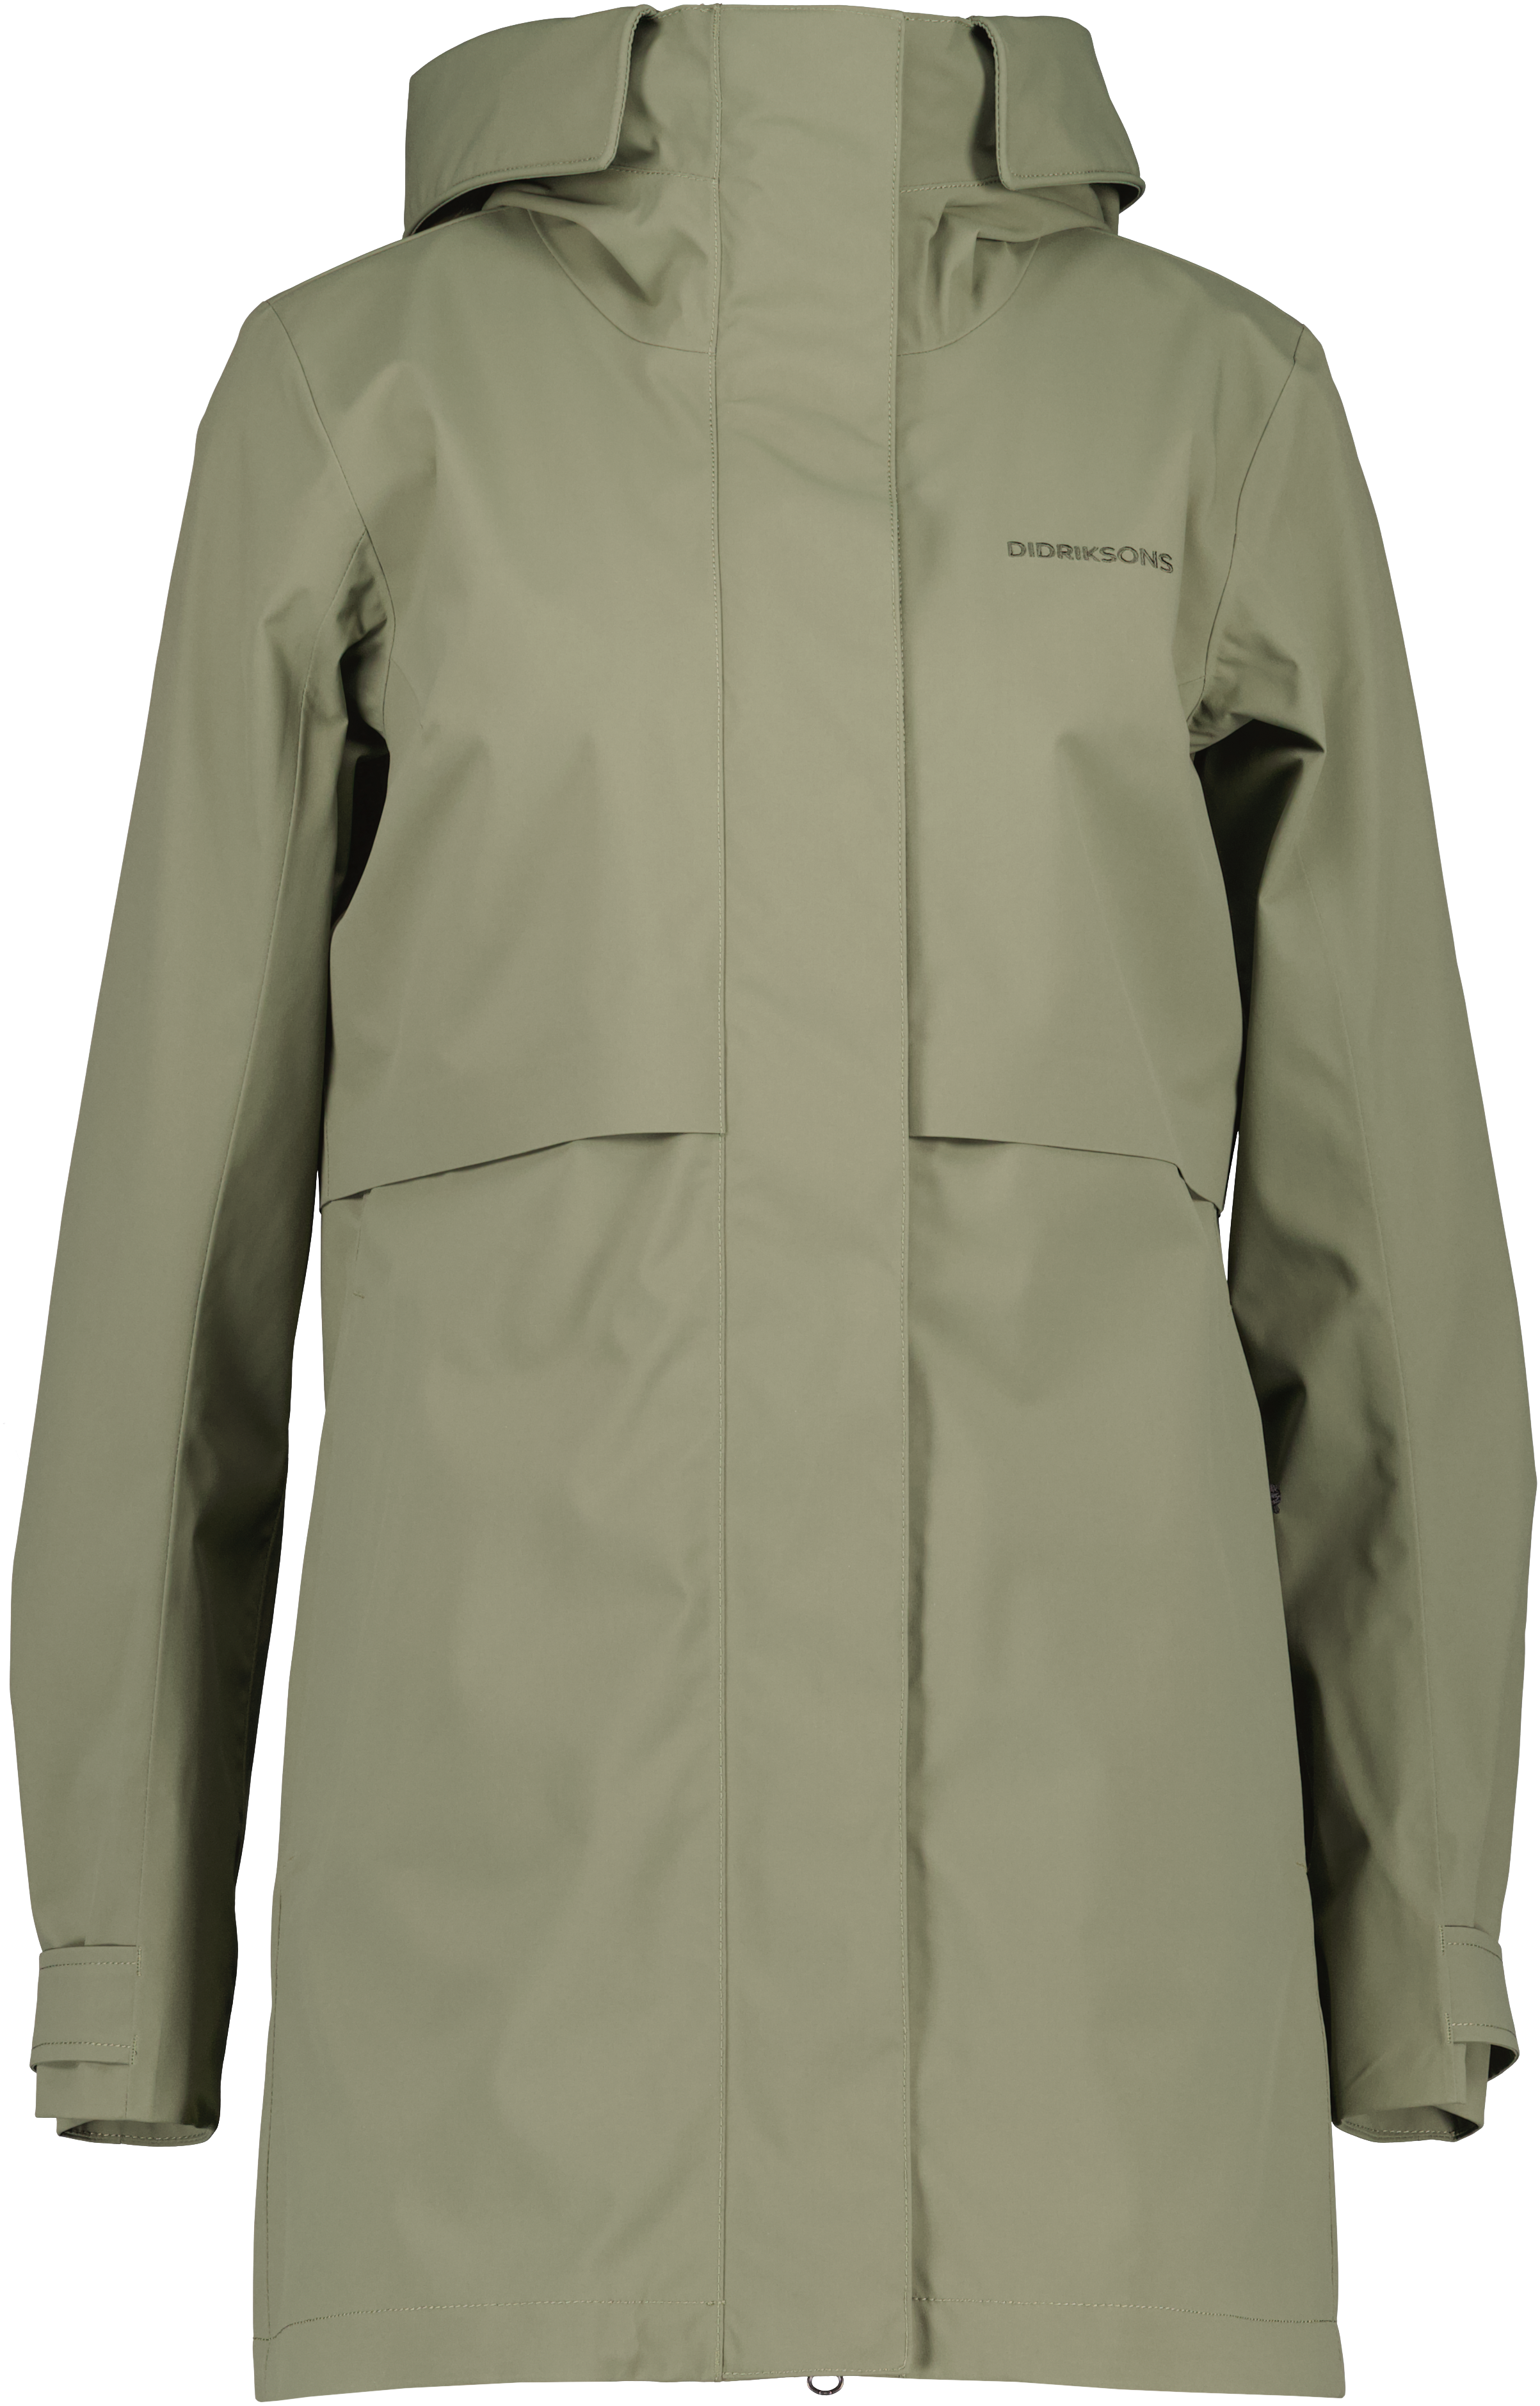 Didriksons Women’s Edith Parka 6 Dusty Olive